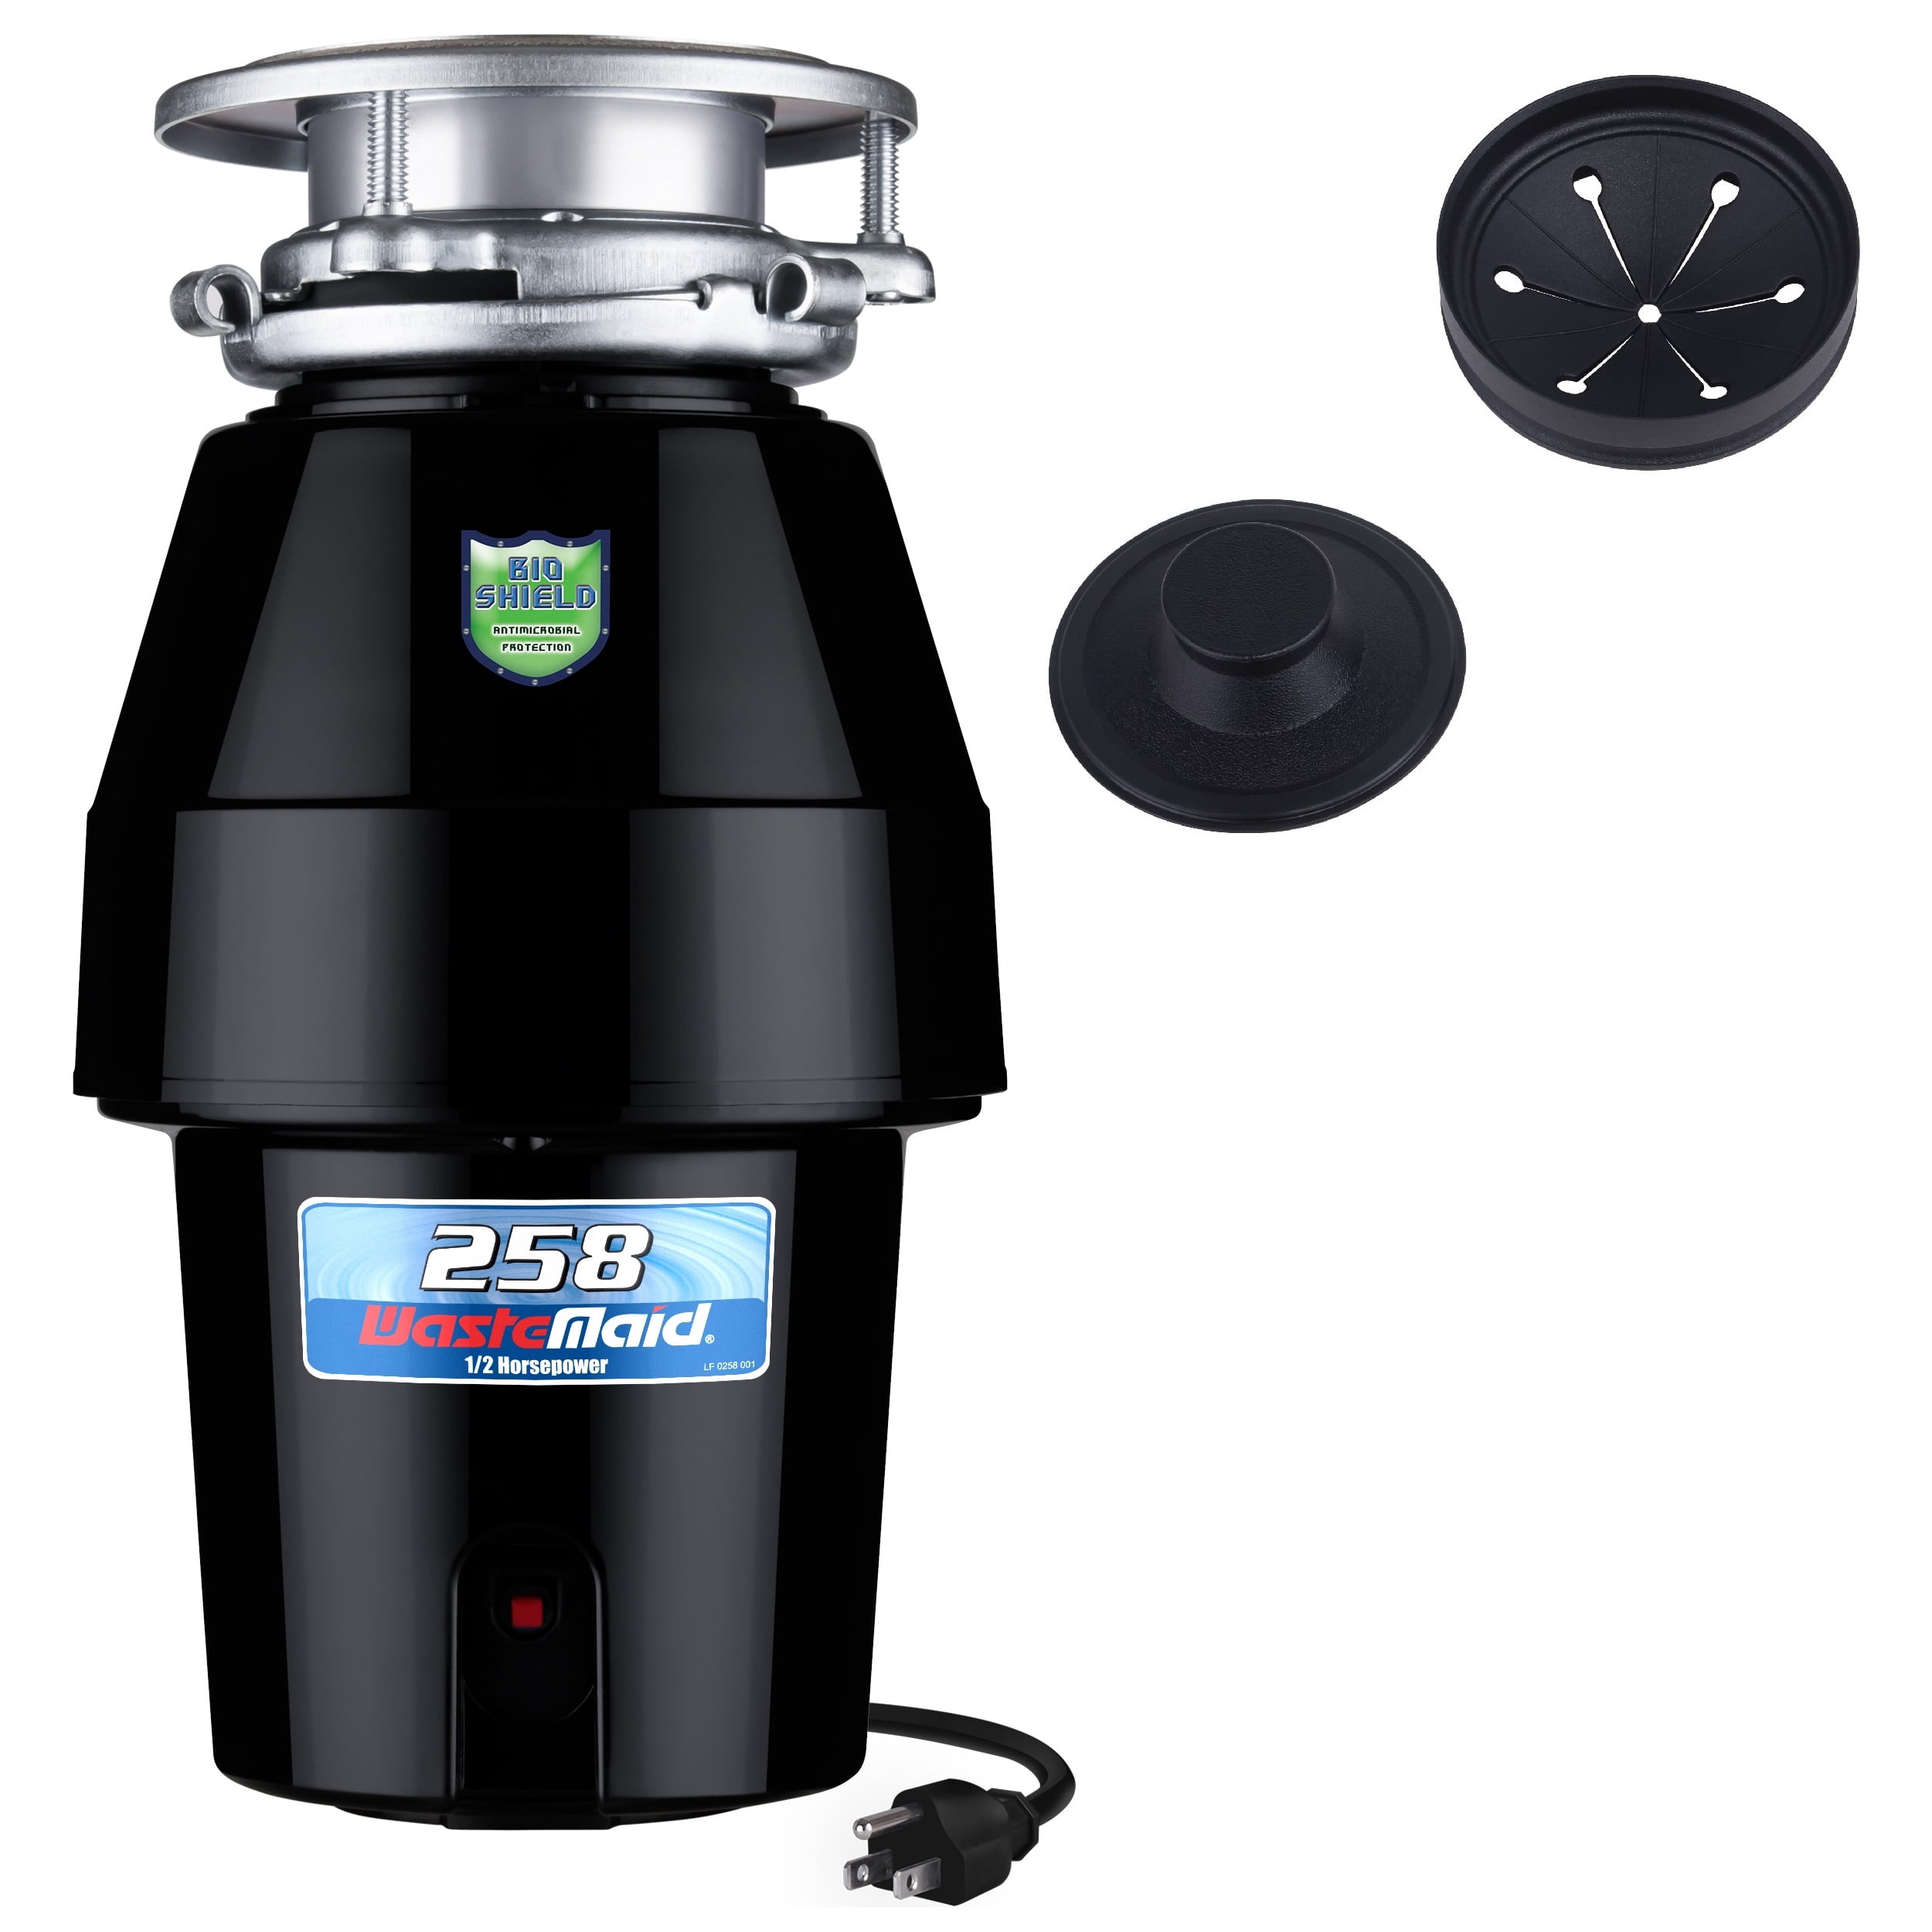 Waste Maid Standard 1/2 HP Continuous Feed Garbage Disposal 10-US-WM-158-3B 